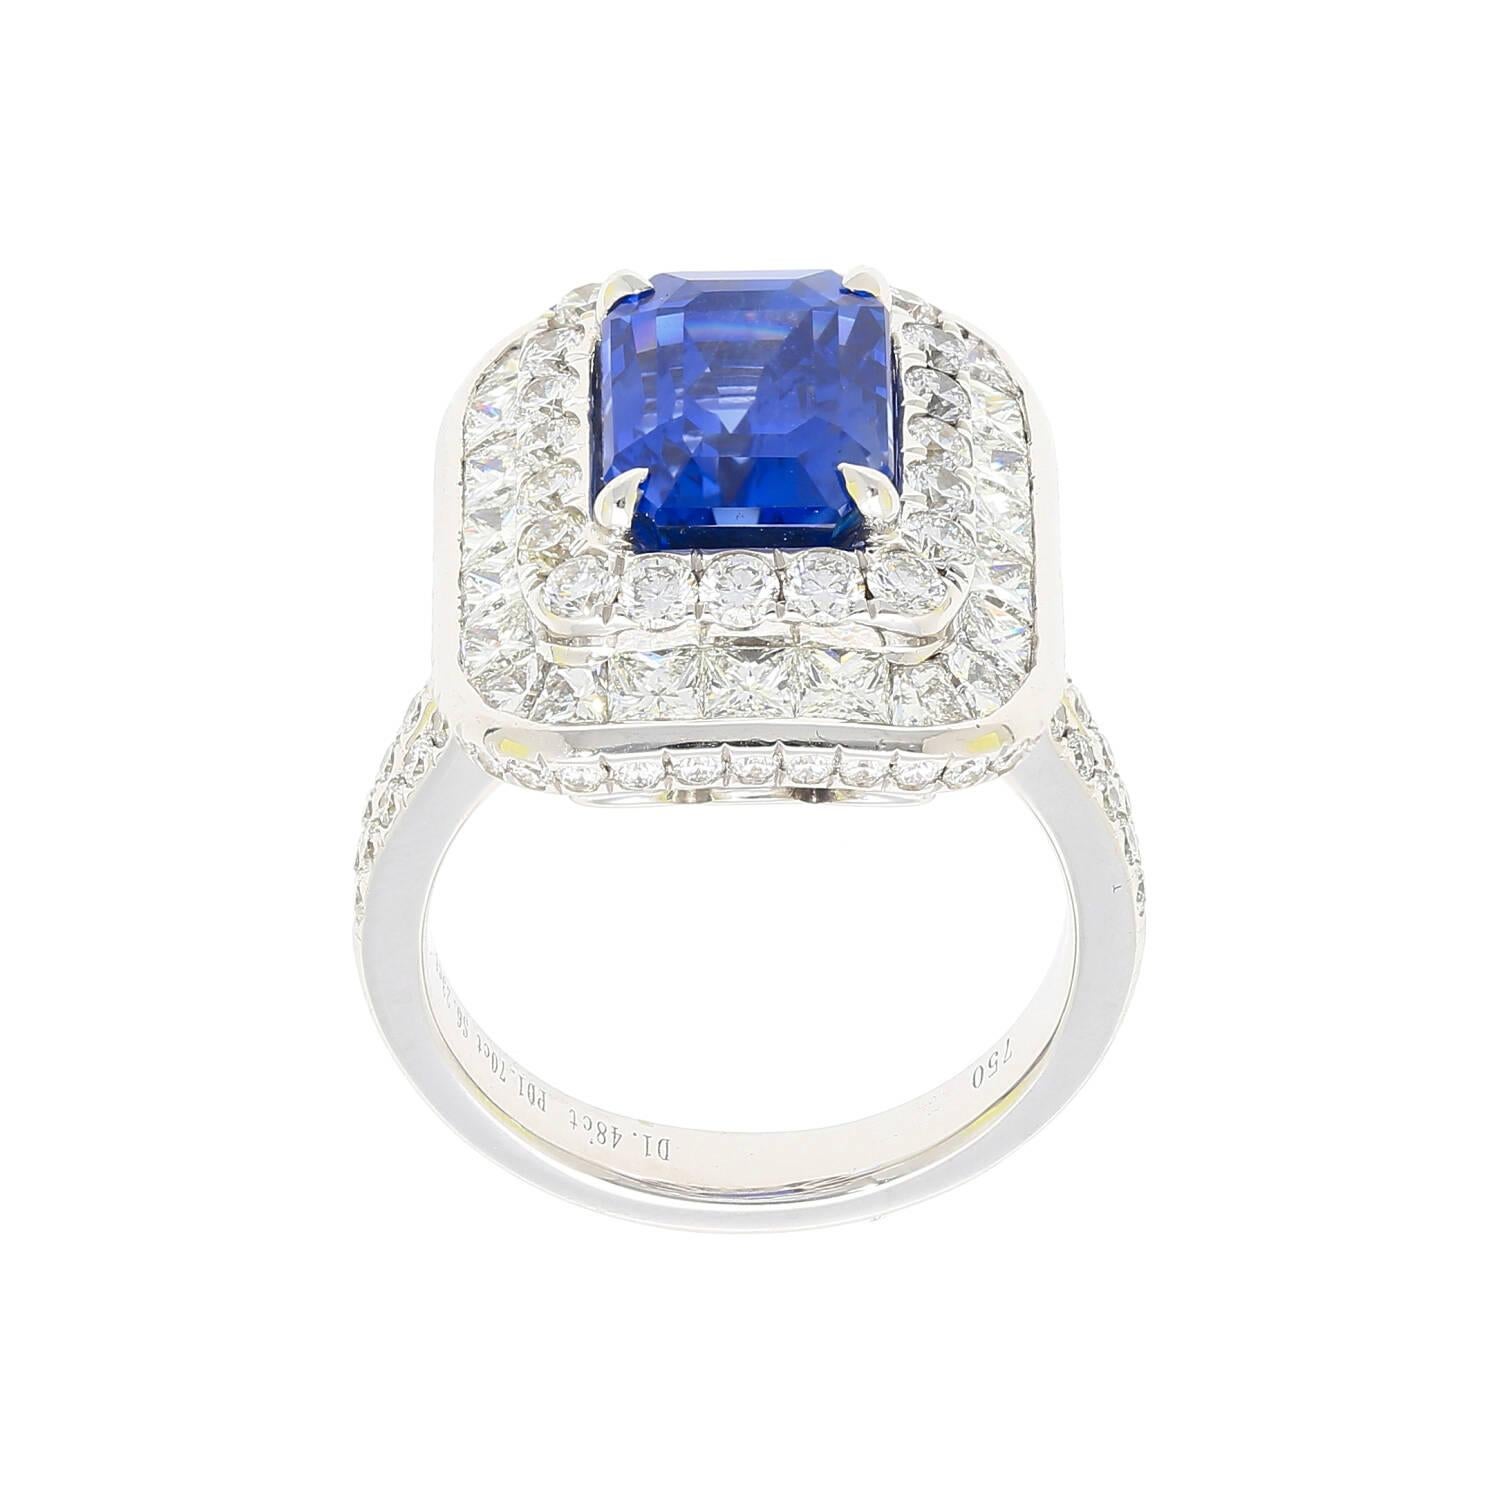 Shop this 6.26 carat no heat Burma Blue Sapphire and mixed-cut diamond cocktail ring. The center stone is a gorgeous emerald cut that radiants vibrant deep blue color hues. A rare gem considering it has no heat treatment of any kind. Set with 2.58